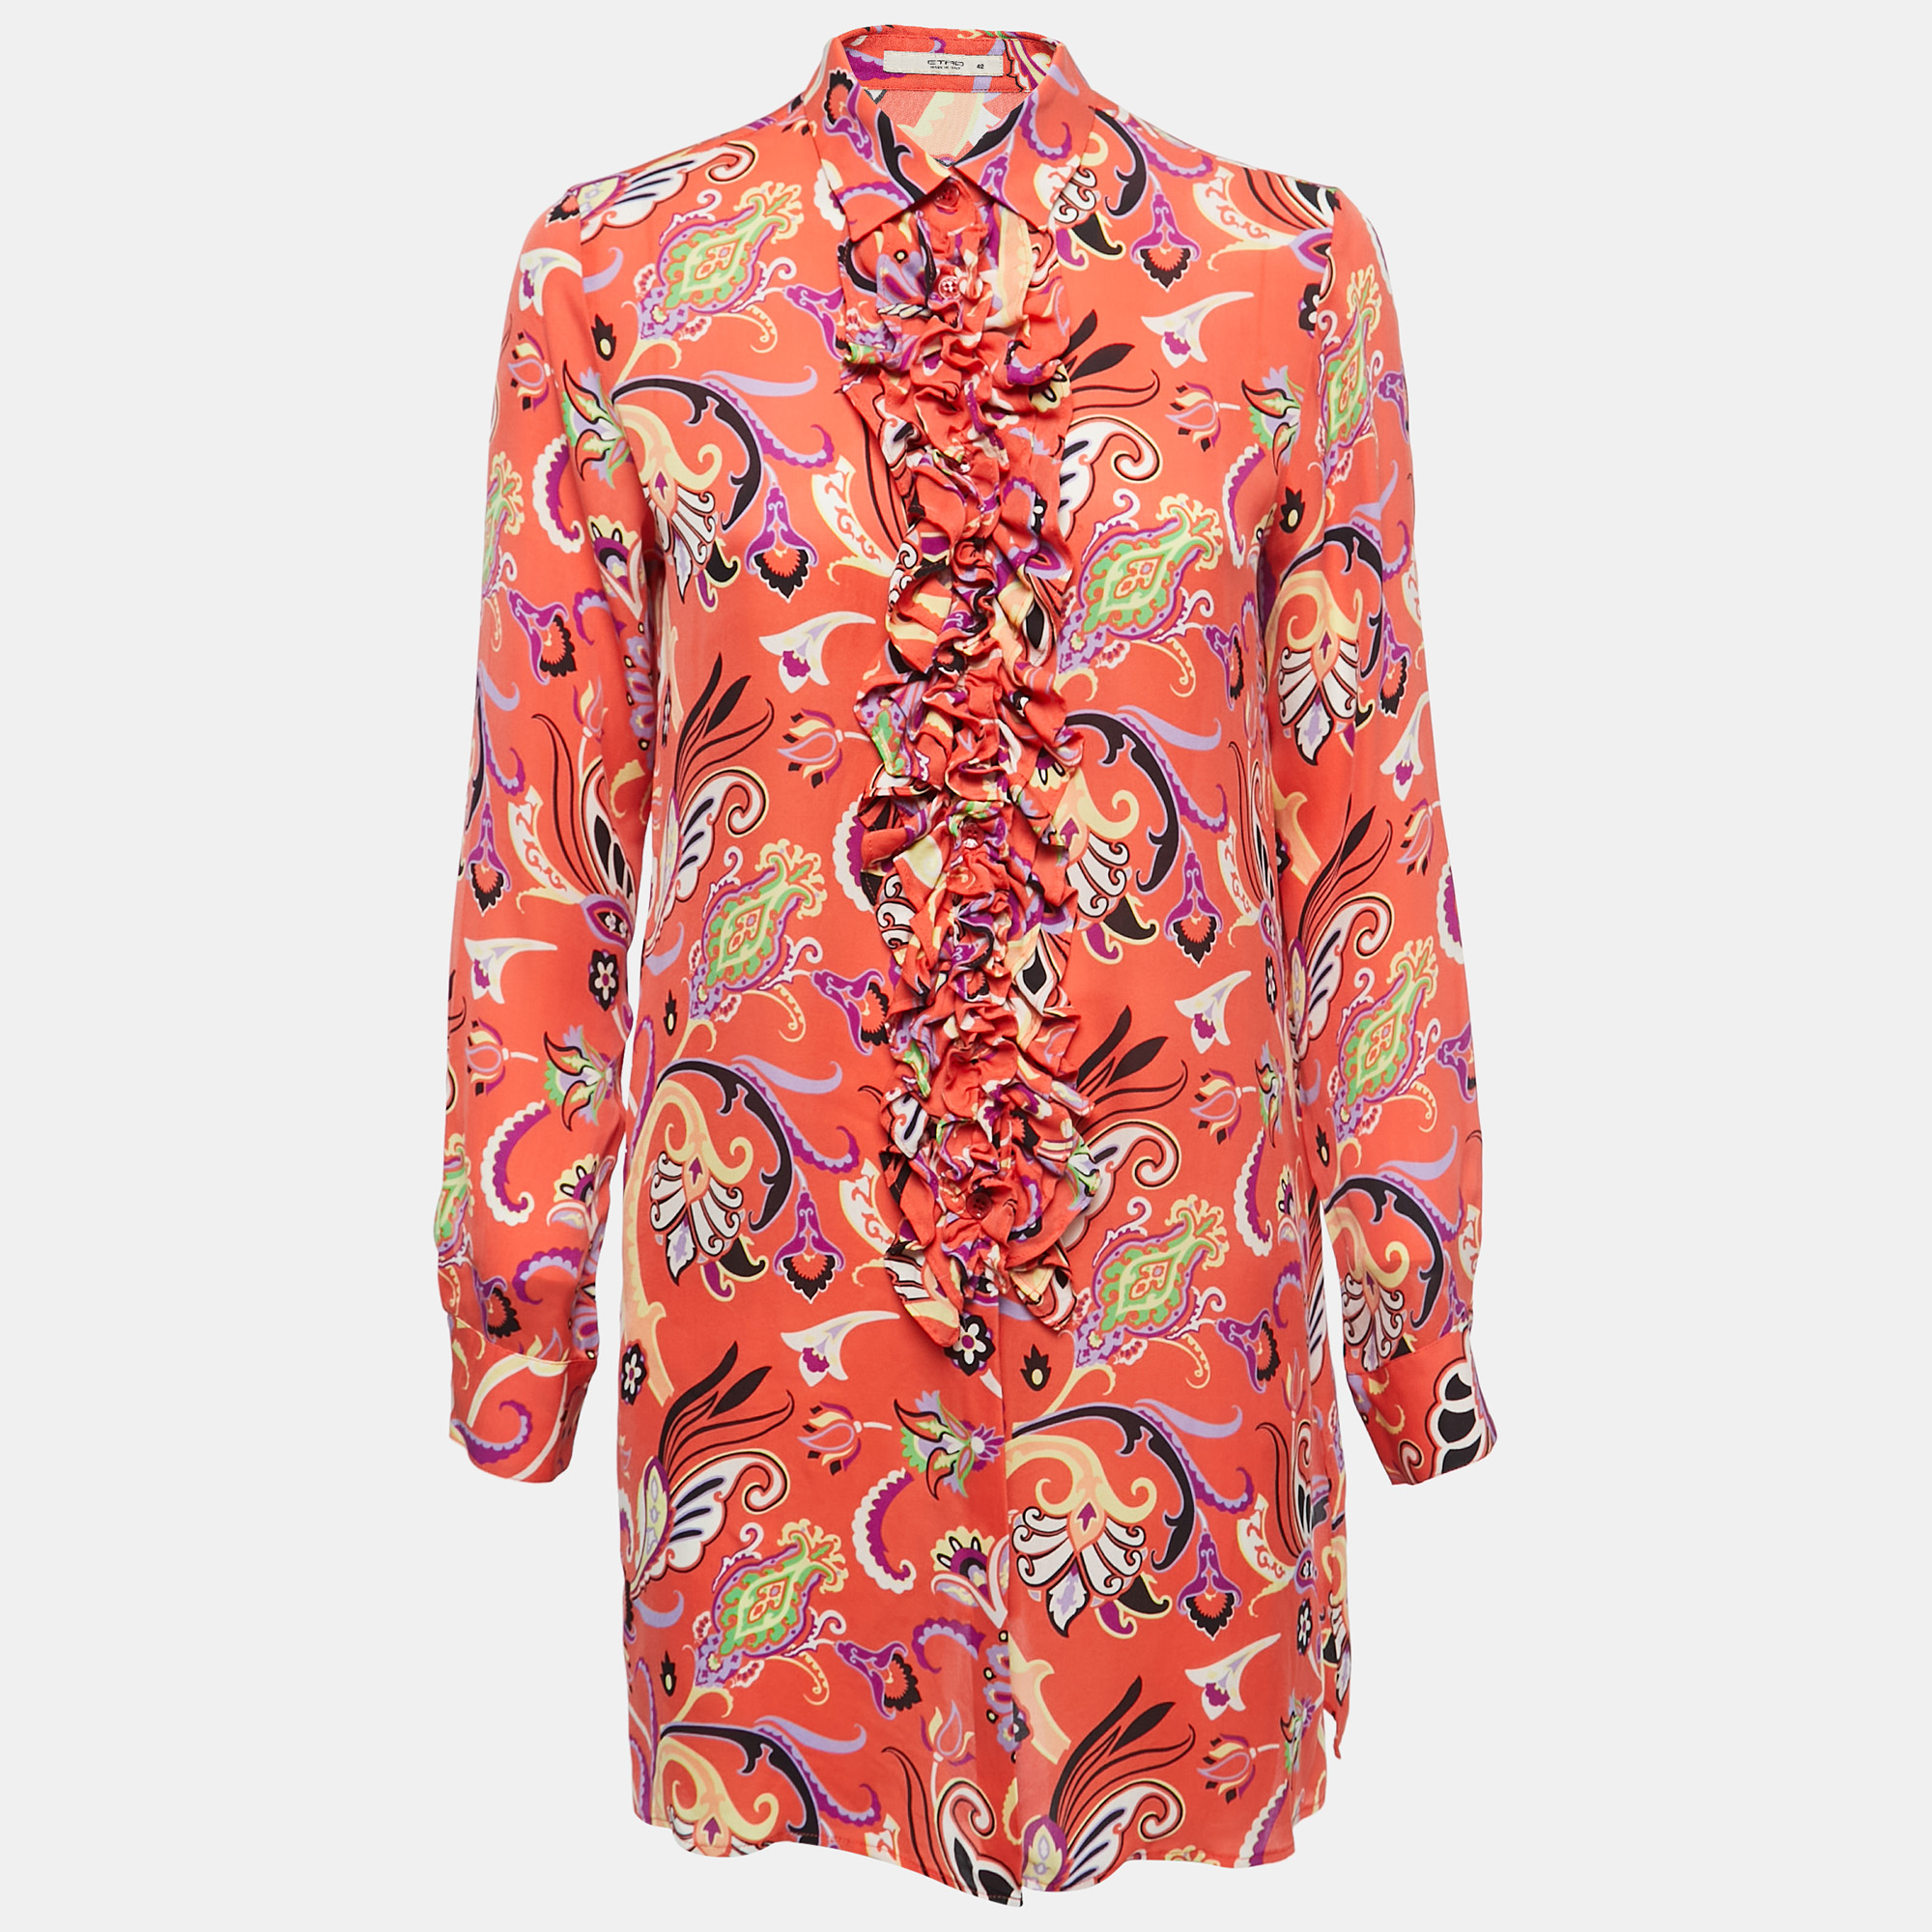 Etro Multicolor Printed Silk Ruffled Button Front Shirt Blouse M